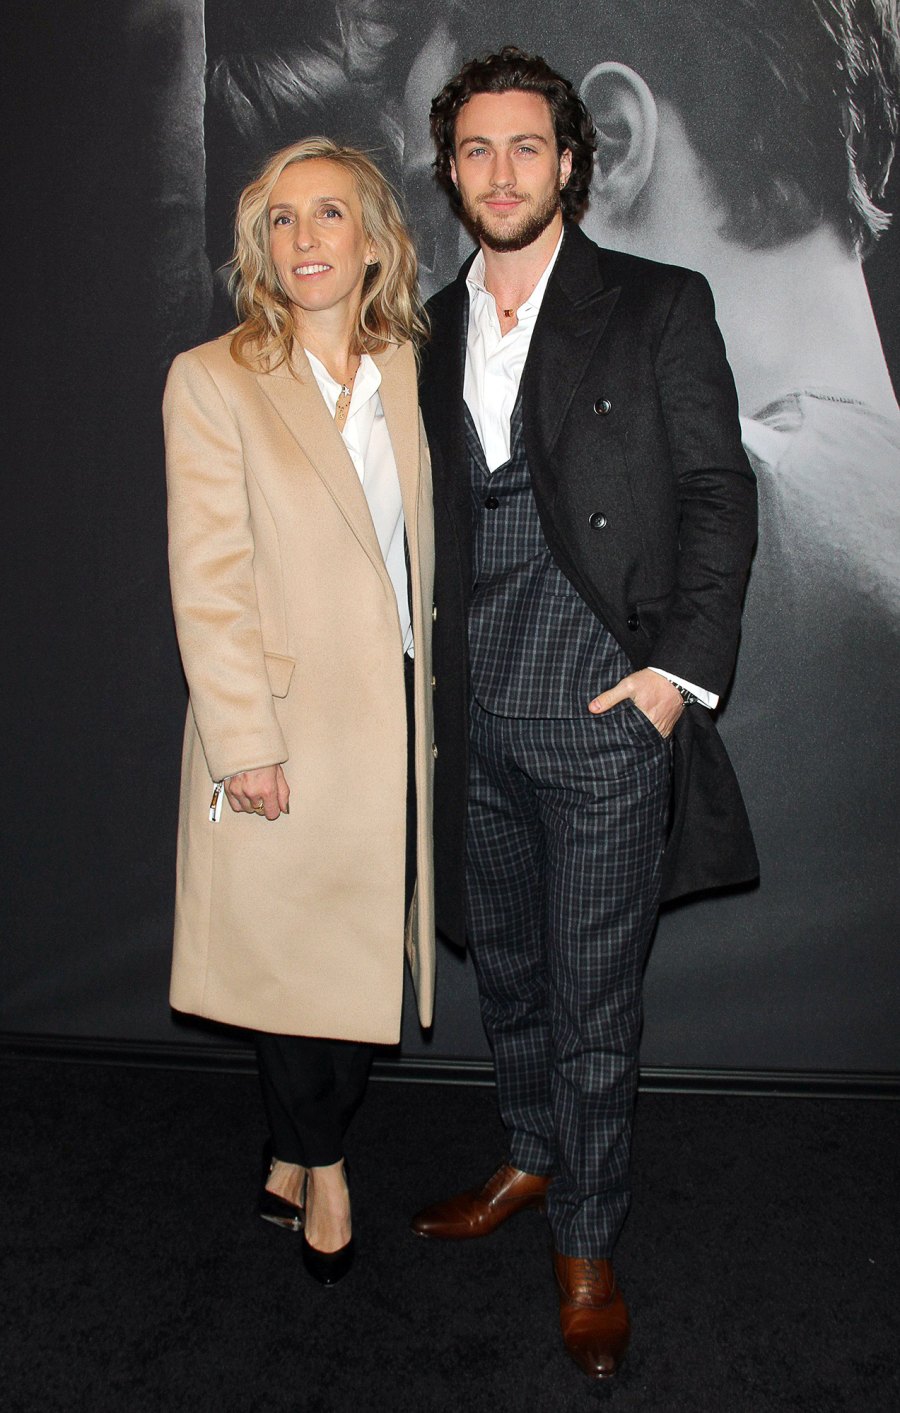 Aaron Taylor-Johnson and Sam Taylor-Johnson's Relationship Timeline- From Coworkers to Parents and Beyond - 103 'Fifty Shades of Grey' film screening, New York, America - 06 Feb 2015